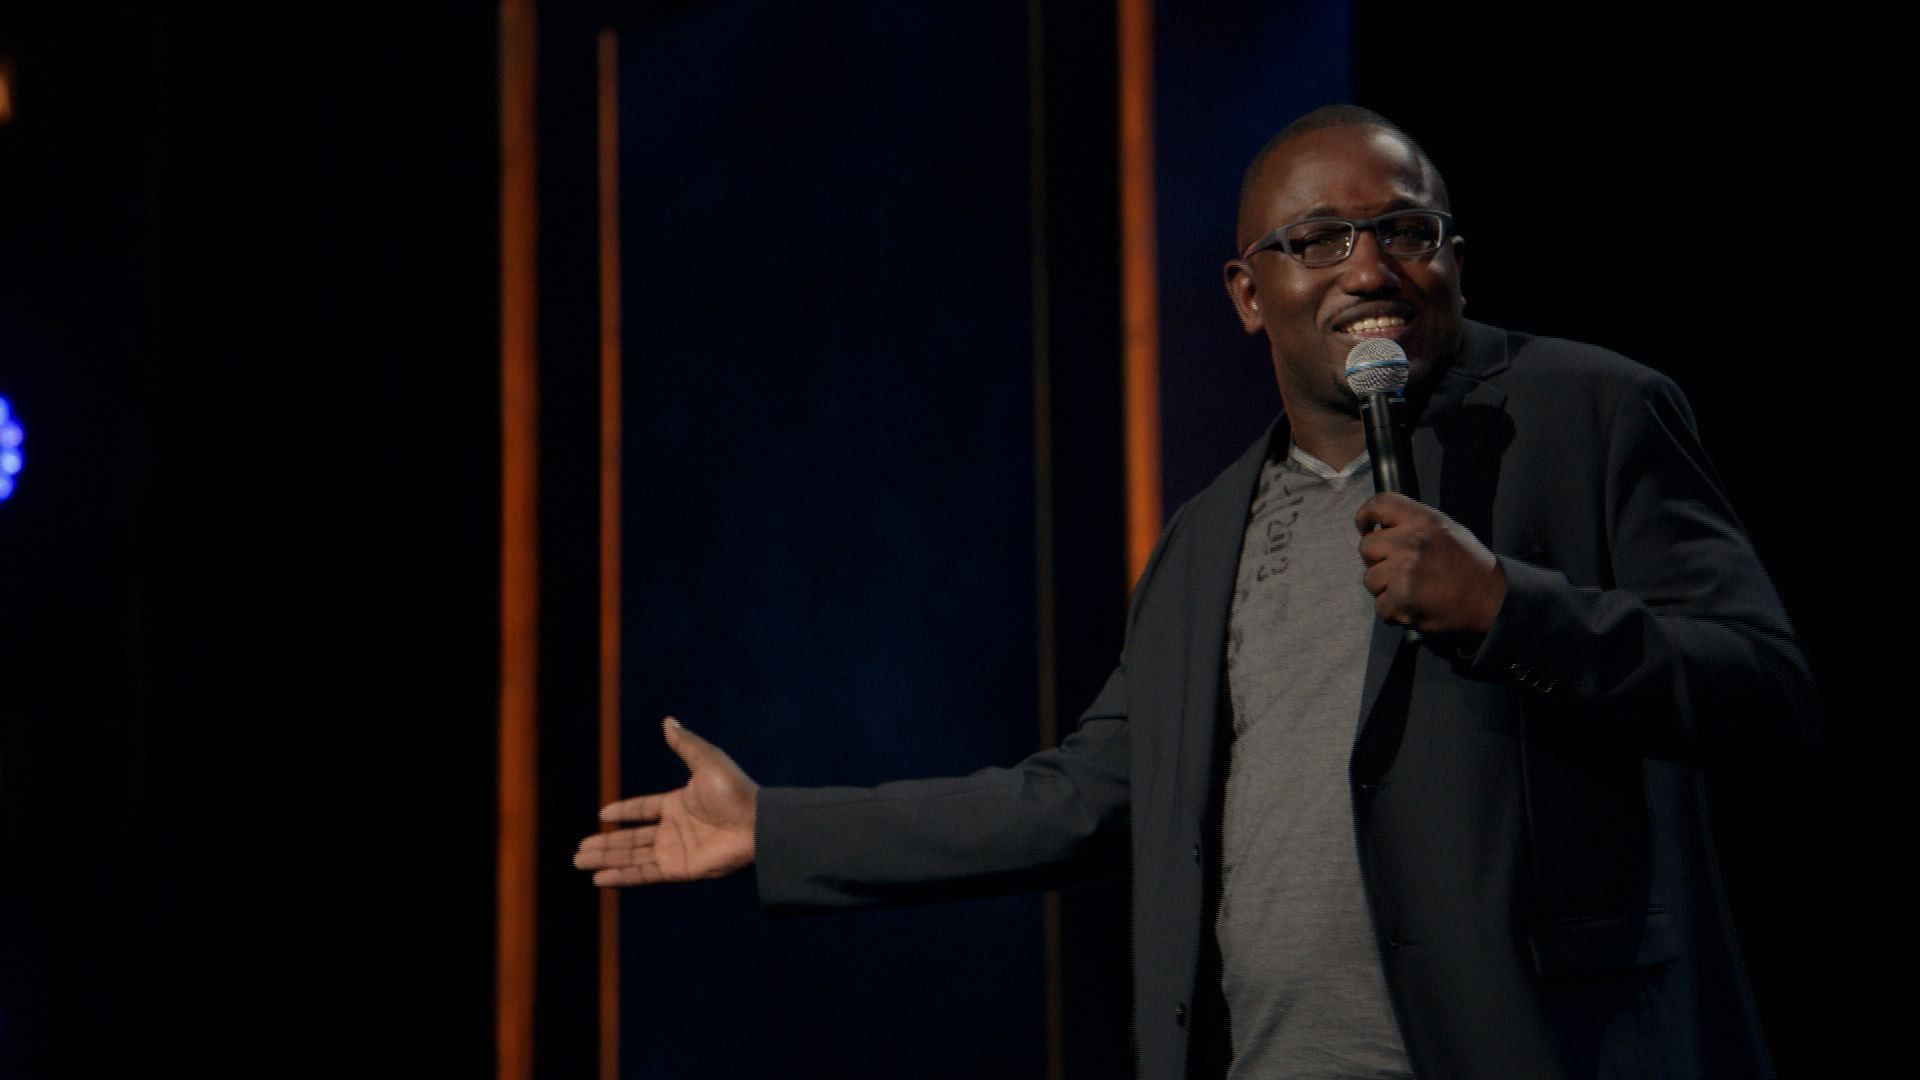 Hannibal Buress: Live from Chicago Backdrop